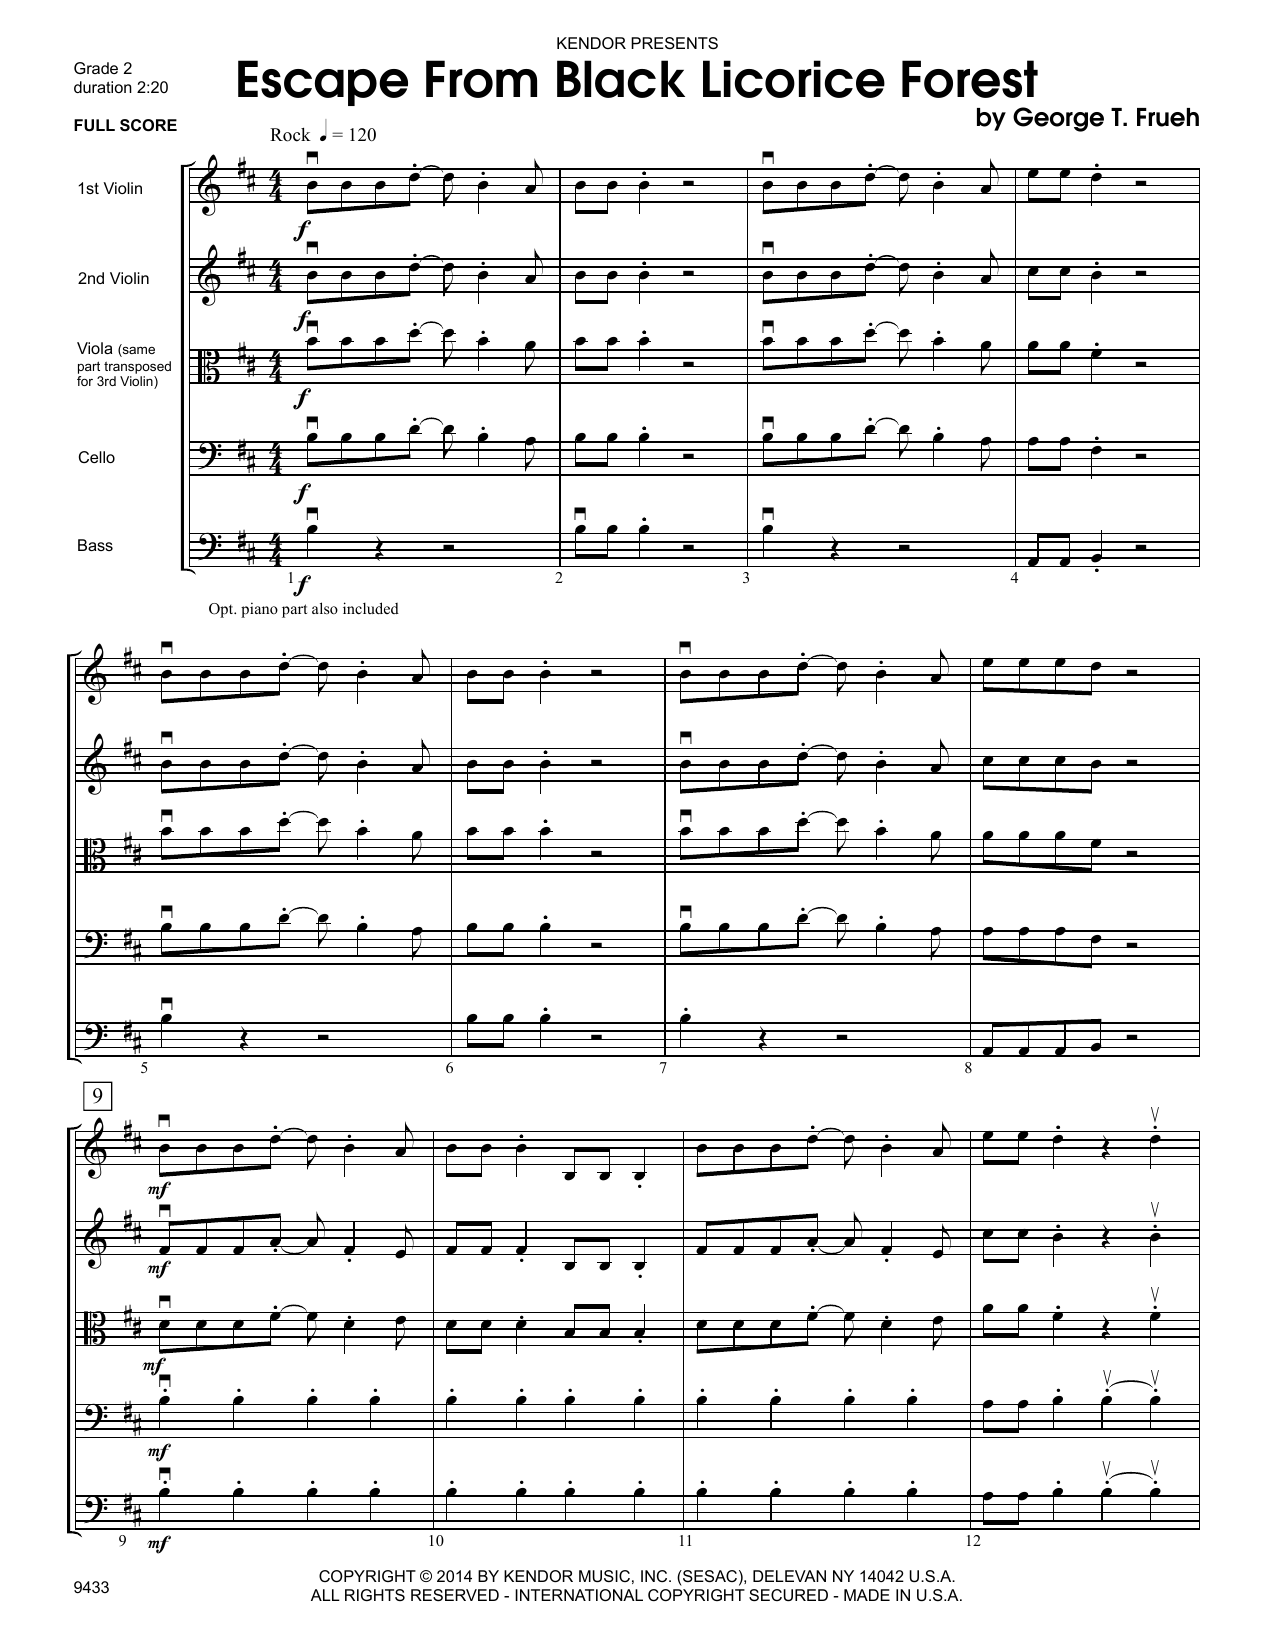 Download George T. Frueh Escape From Black Licorice Forest - Ful Sheet Music